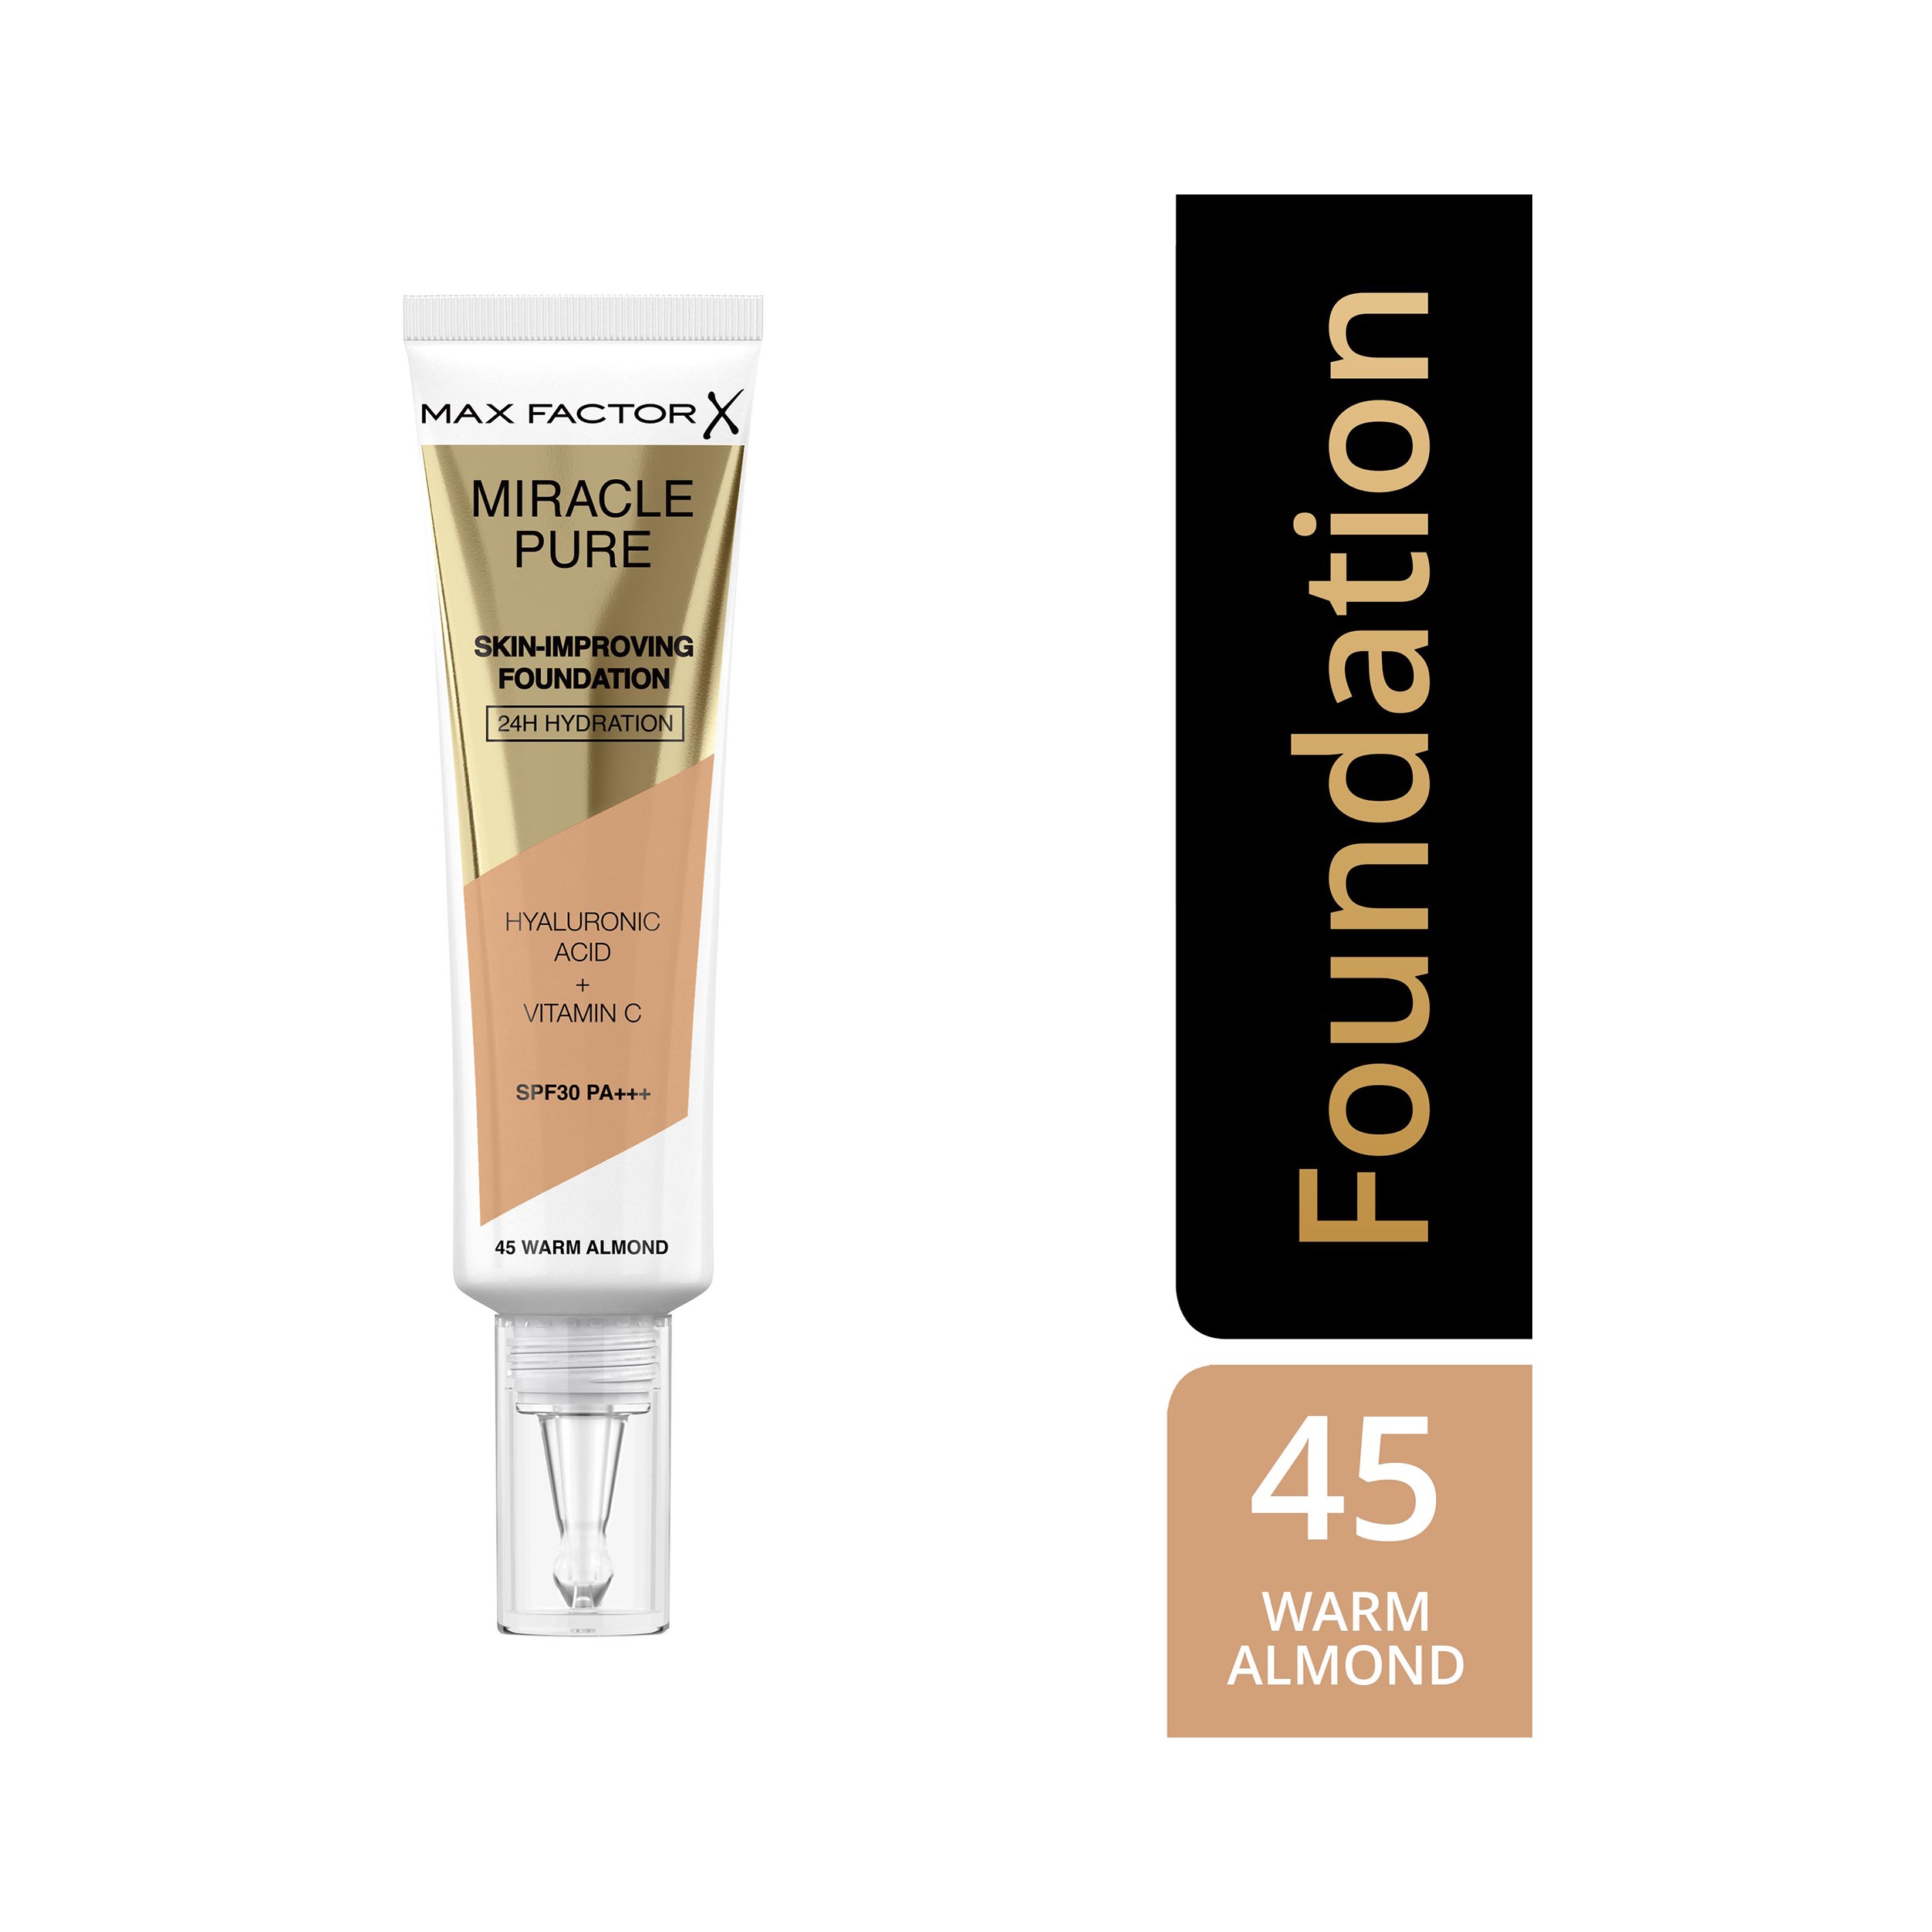 Läs mer om Max Factor Miracle Pure Skin-Improving Foundation 45 Warm Almond